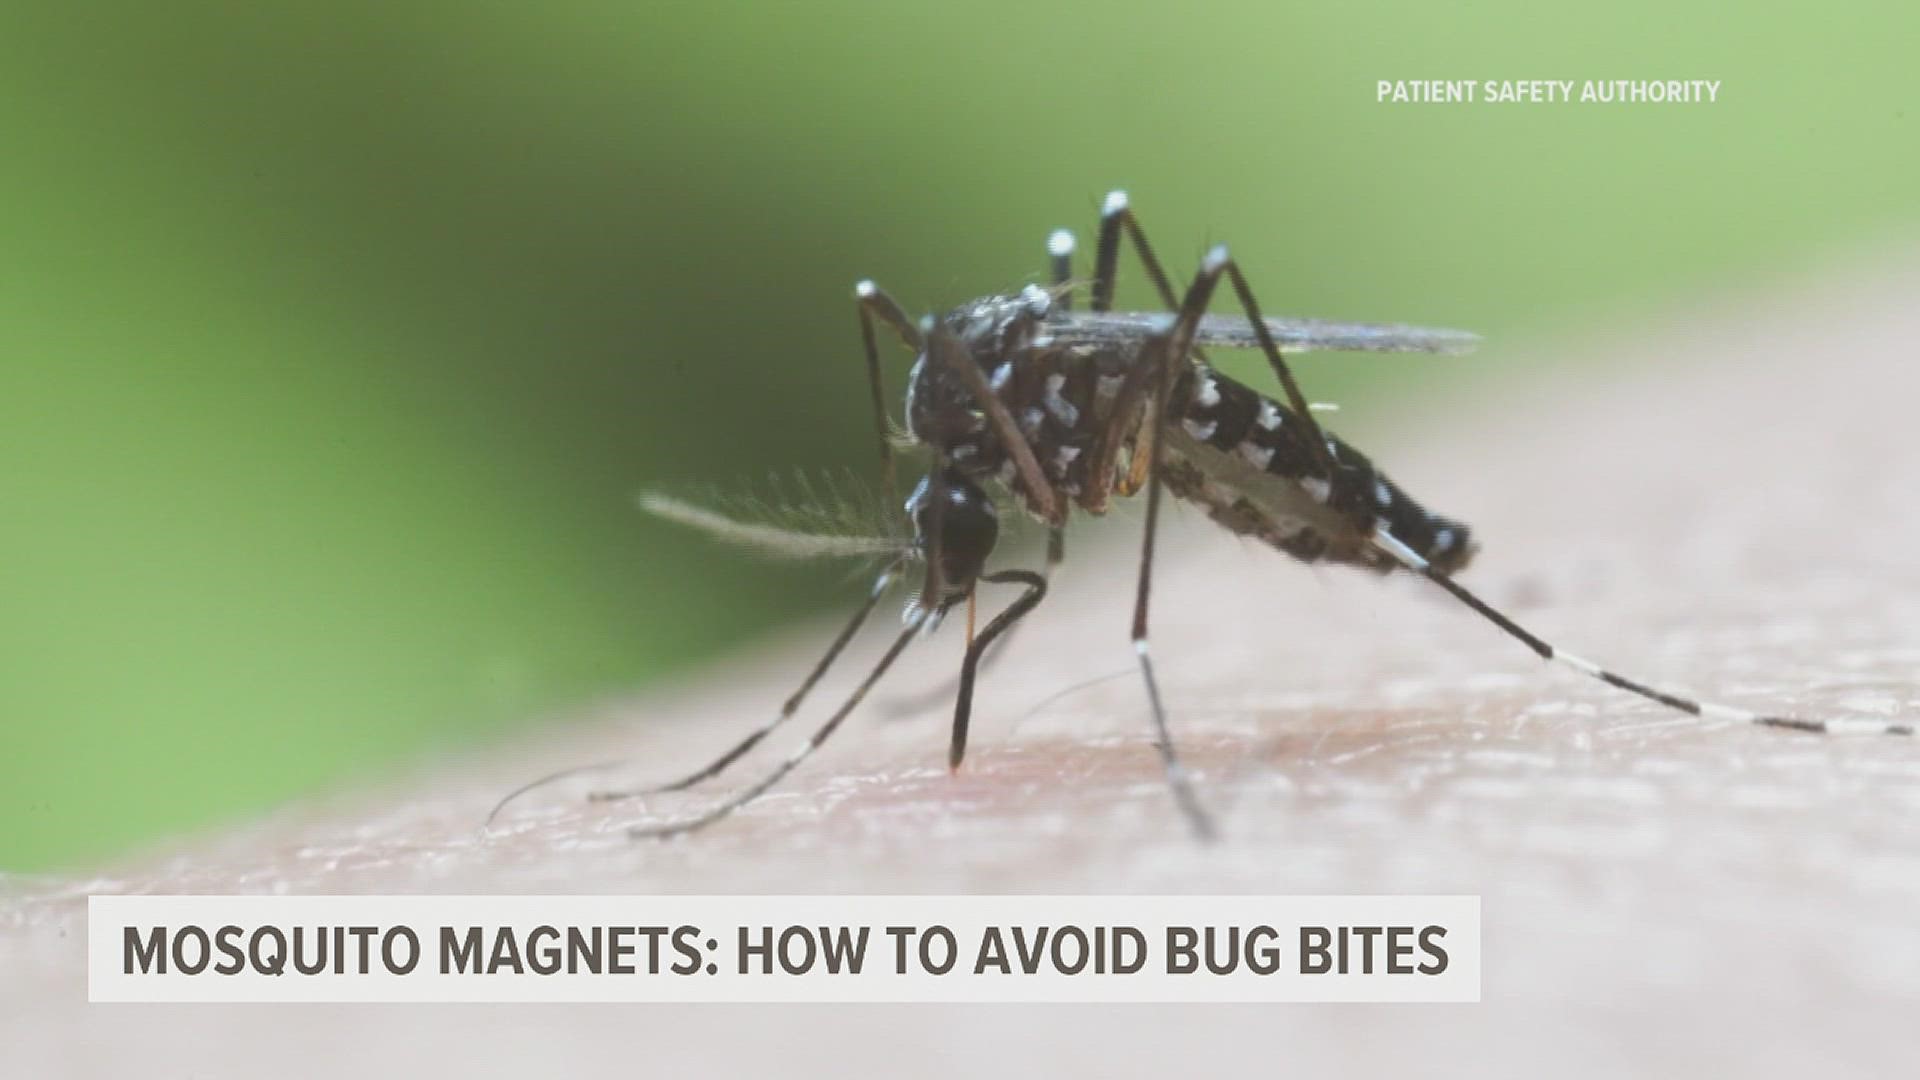 Warm and wet weather leads to more mosquitoes, some of which could carry diseases. Here's how to best avoid and treat bug bites.